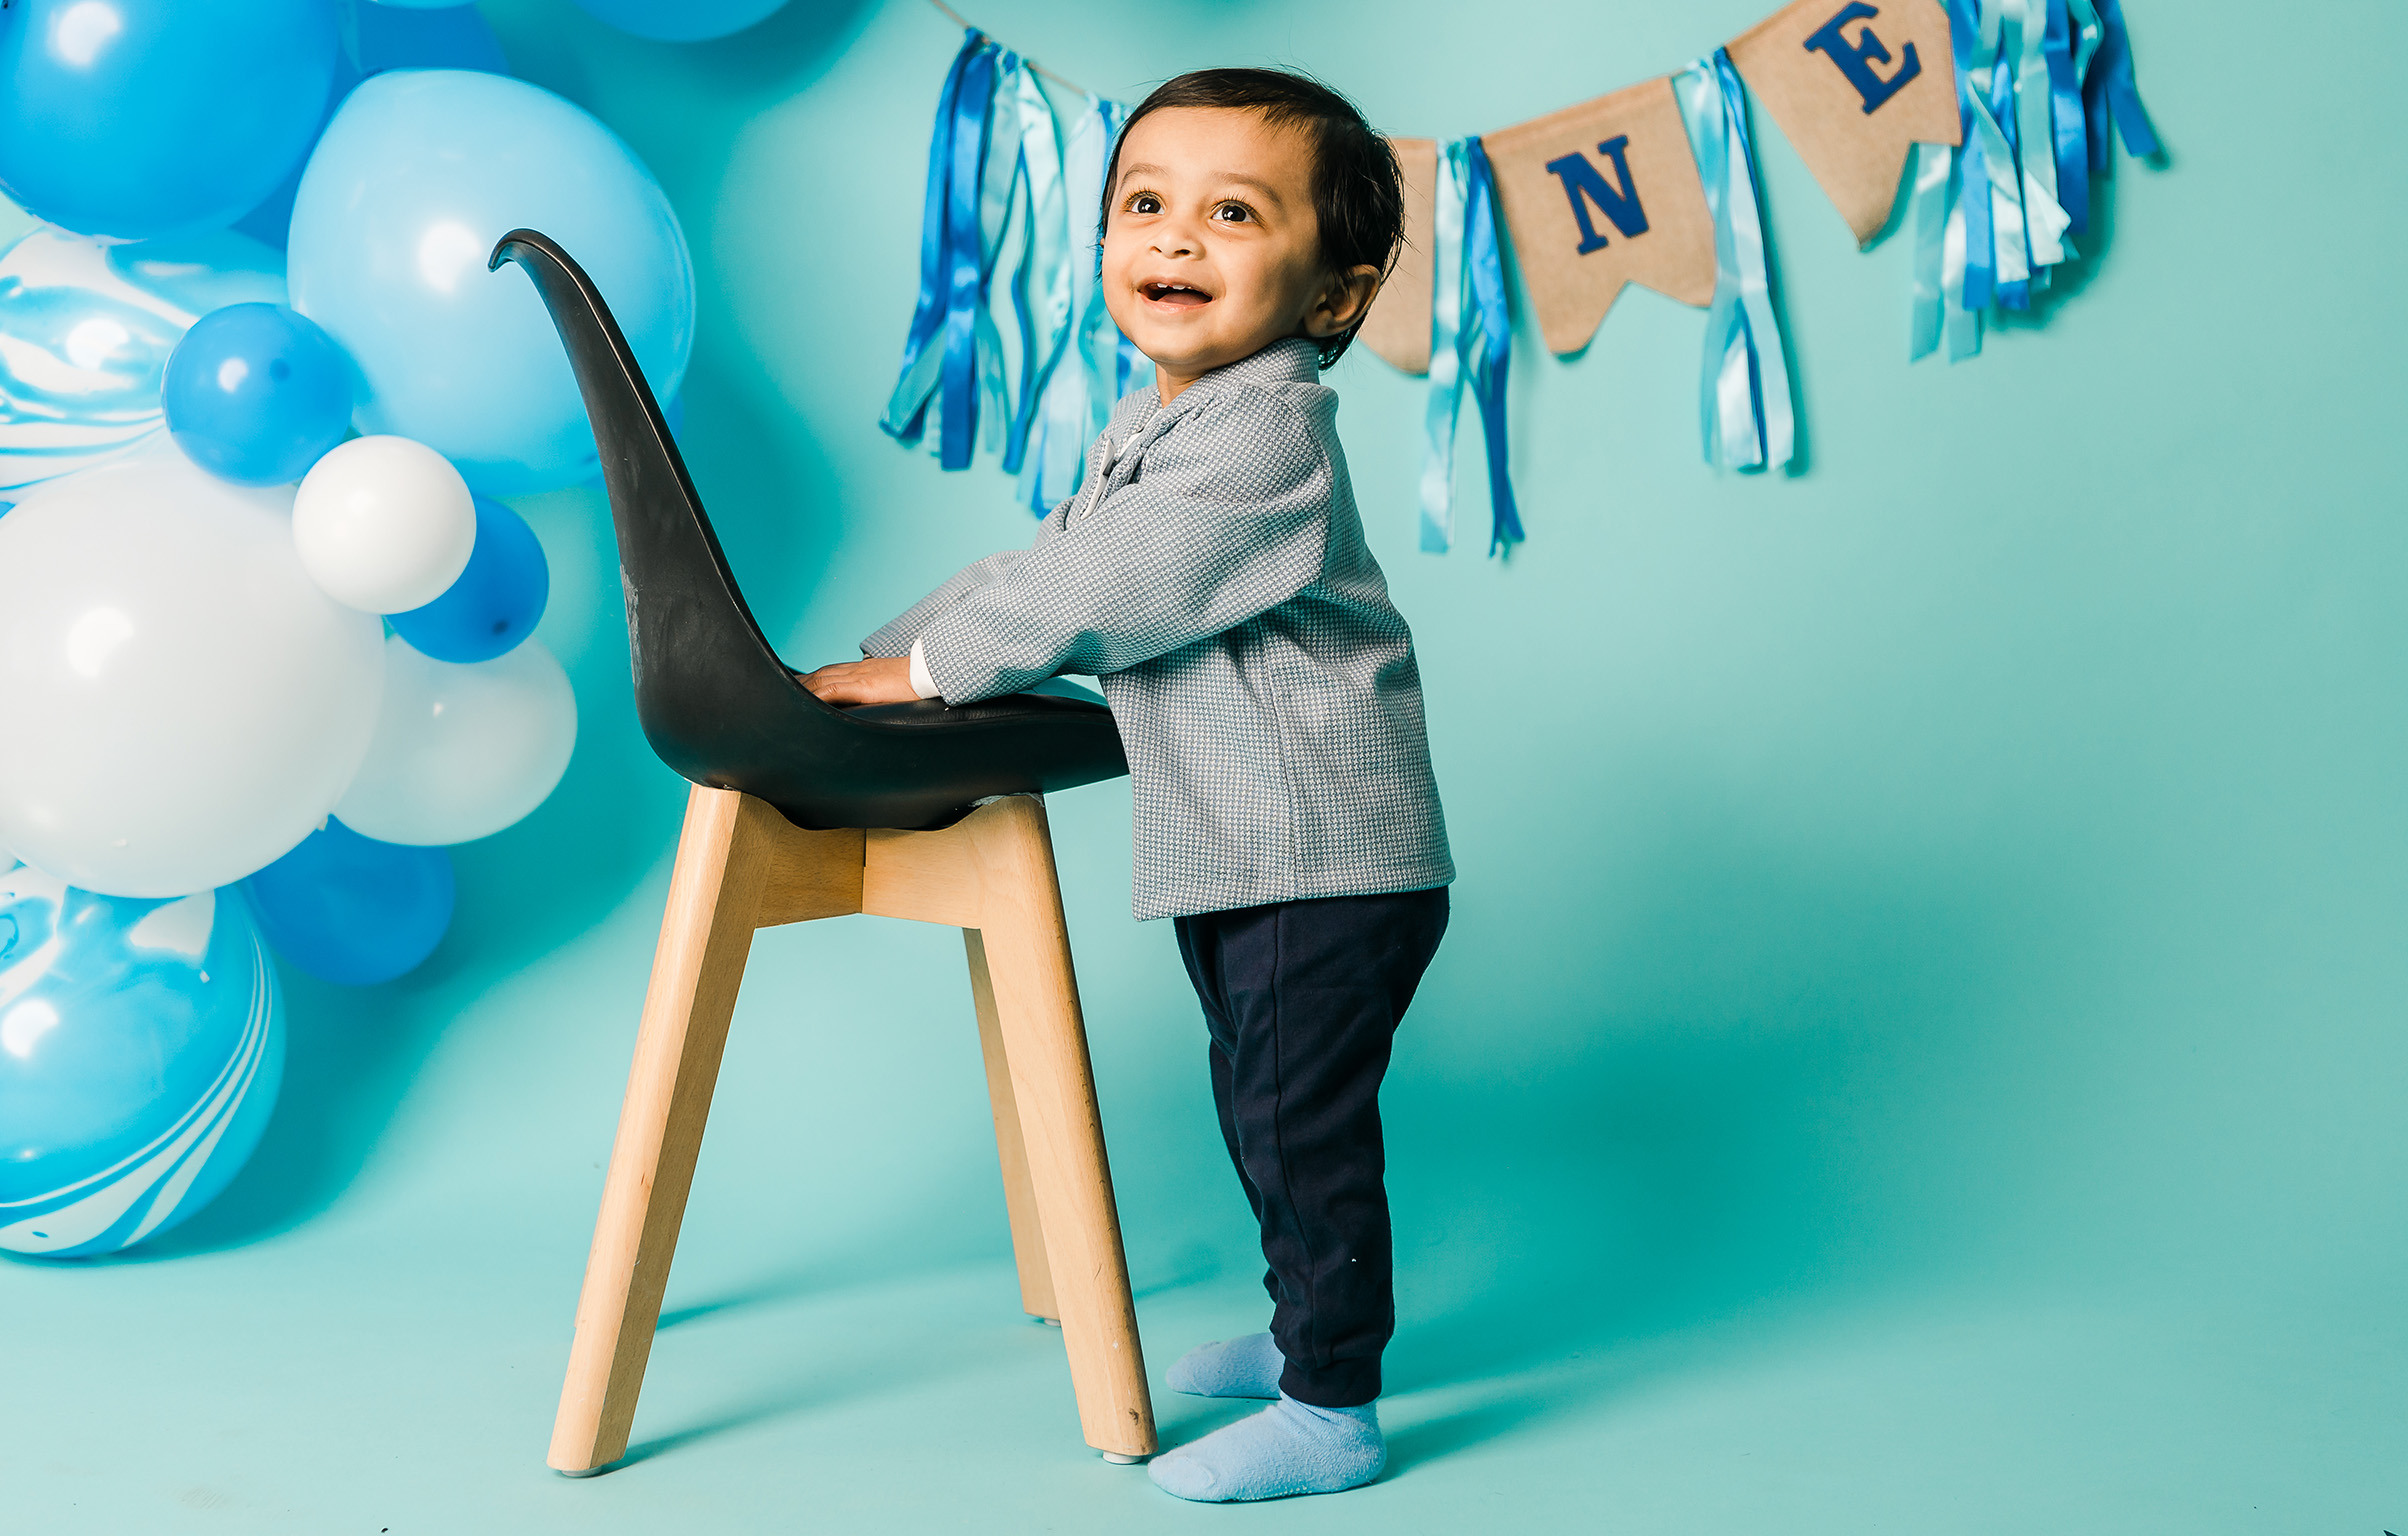 An Edmonton one year old having fun at a studio cake smash session that has balloons from one of Edmonton Toy Stores